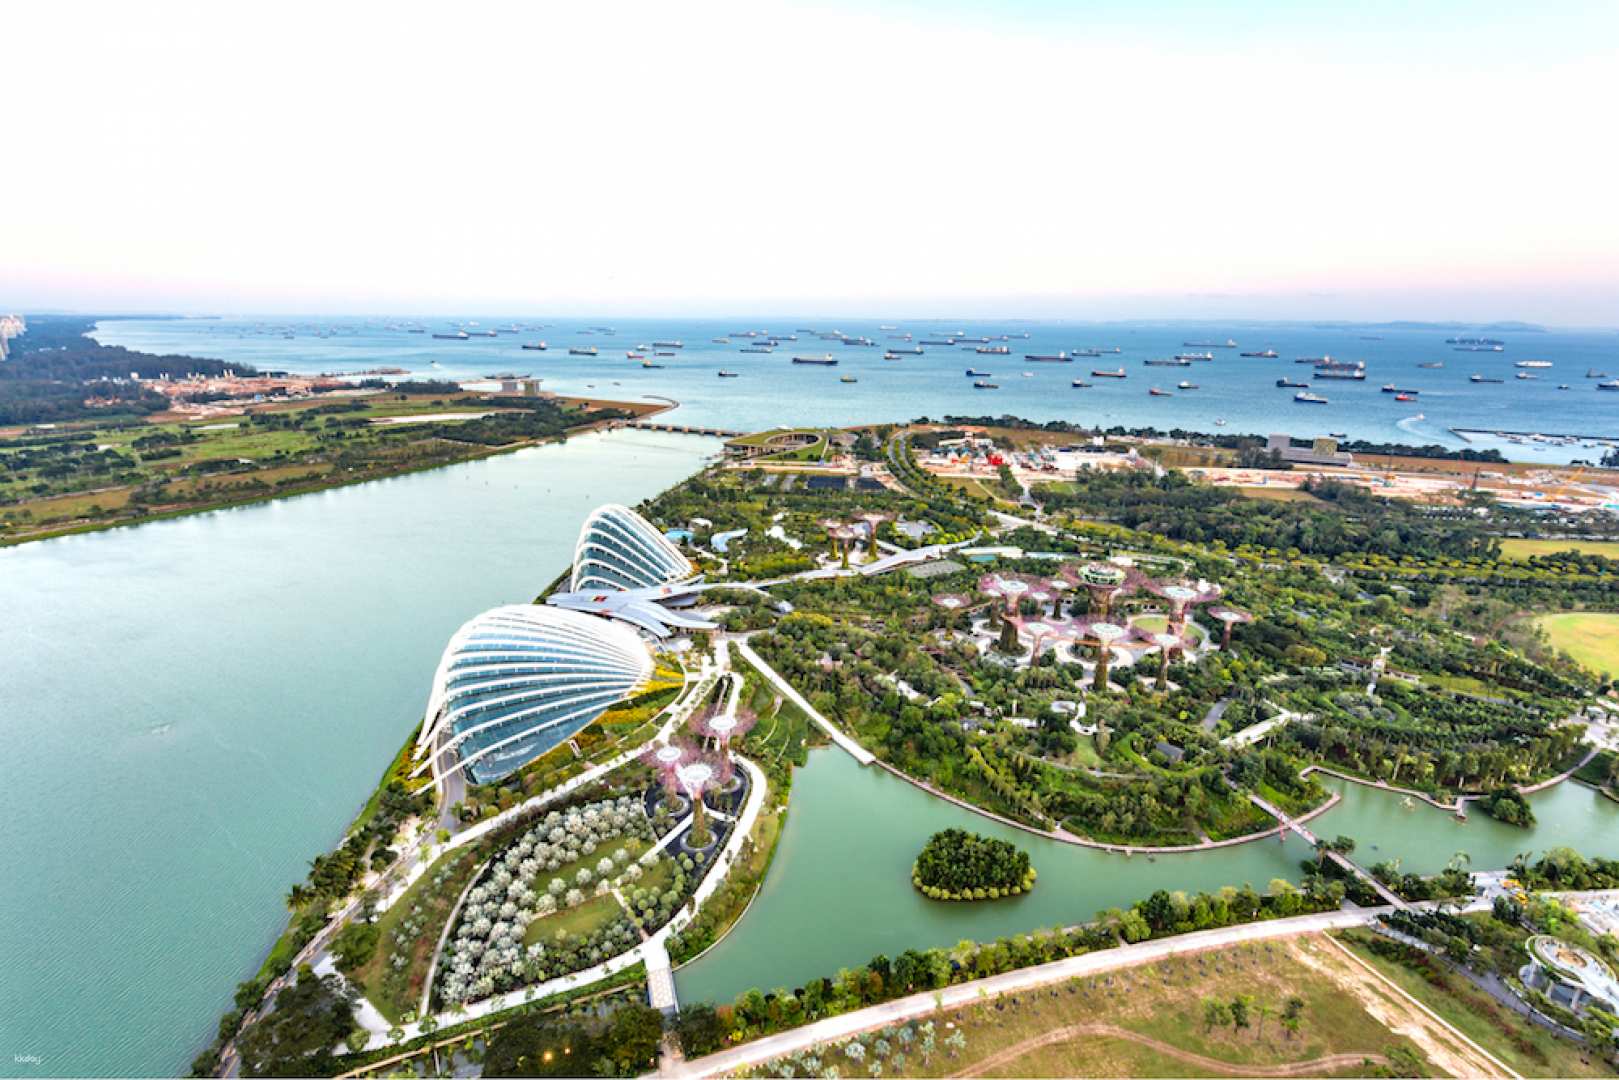 Gardens by the Bay Admission Ticket - Compare Best Prices Here